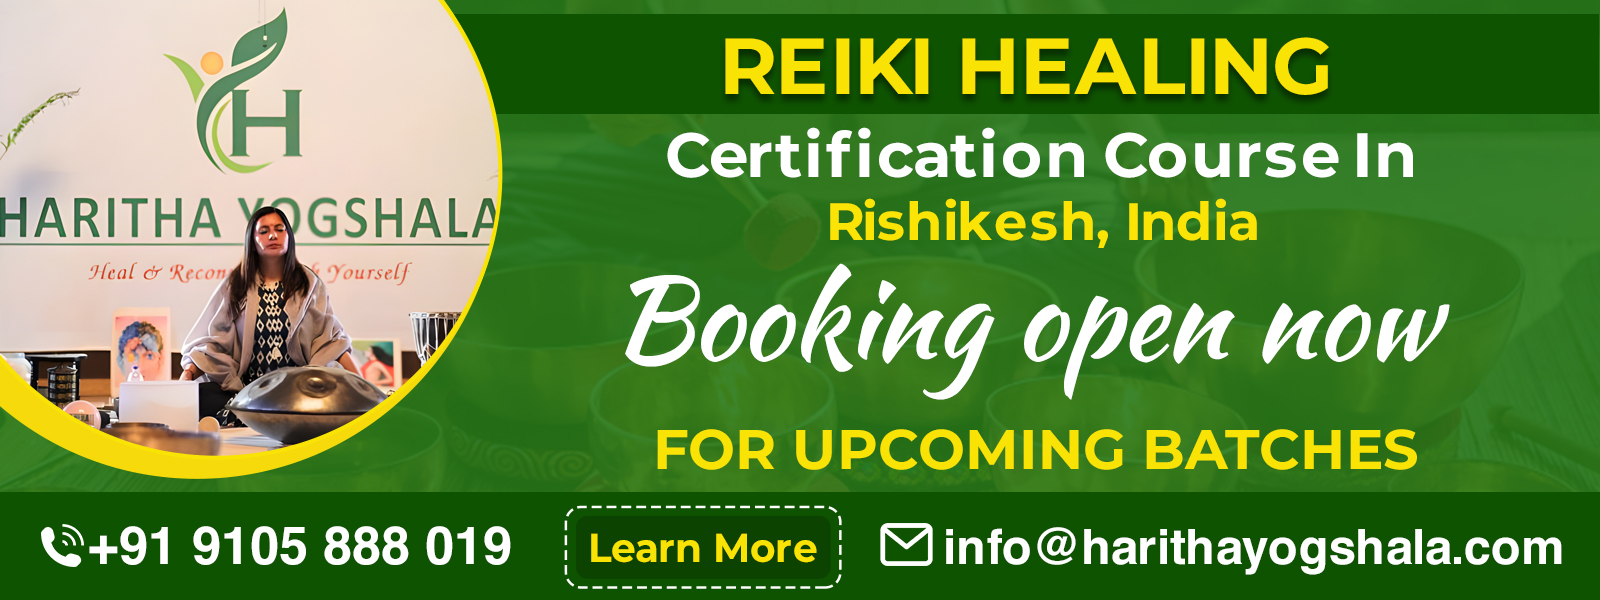 Reiki Healing Certificate Course In India 